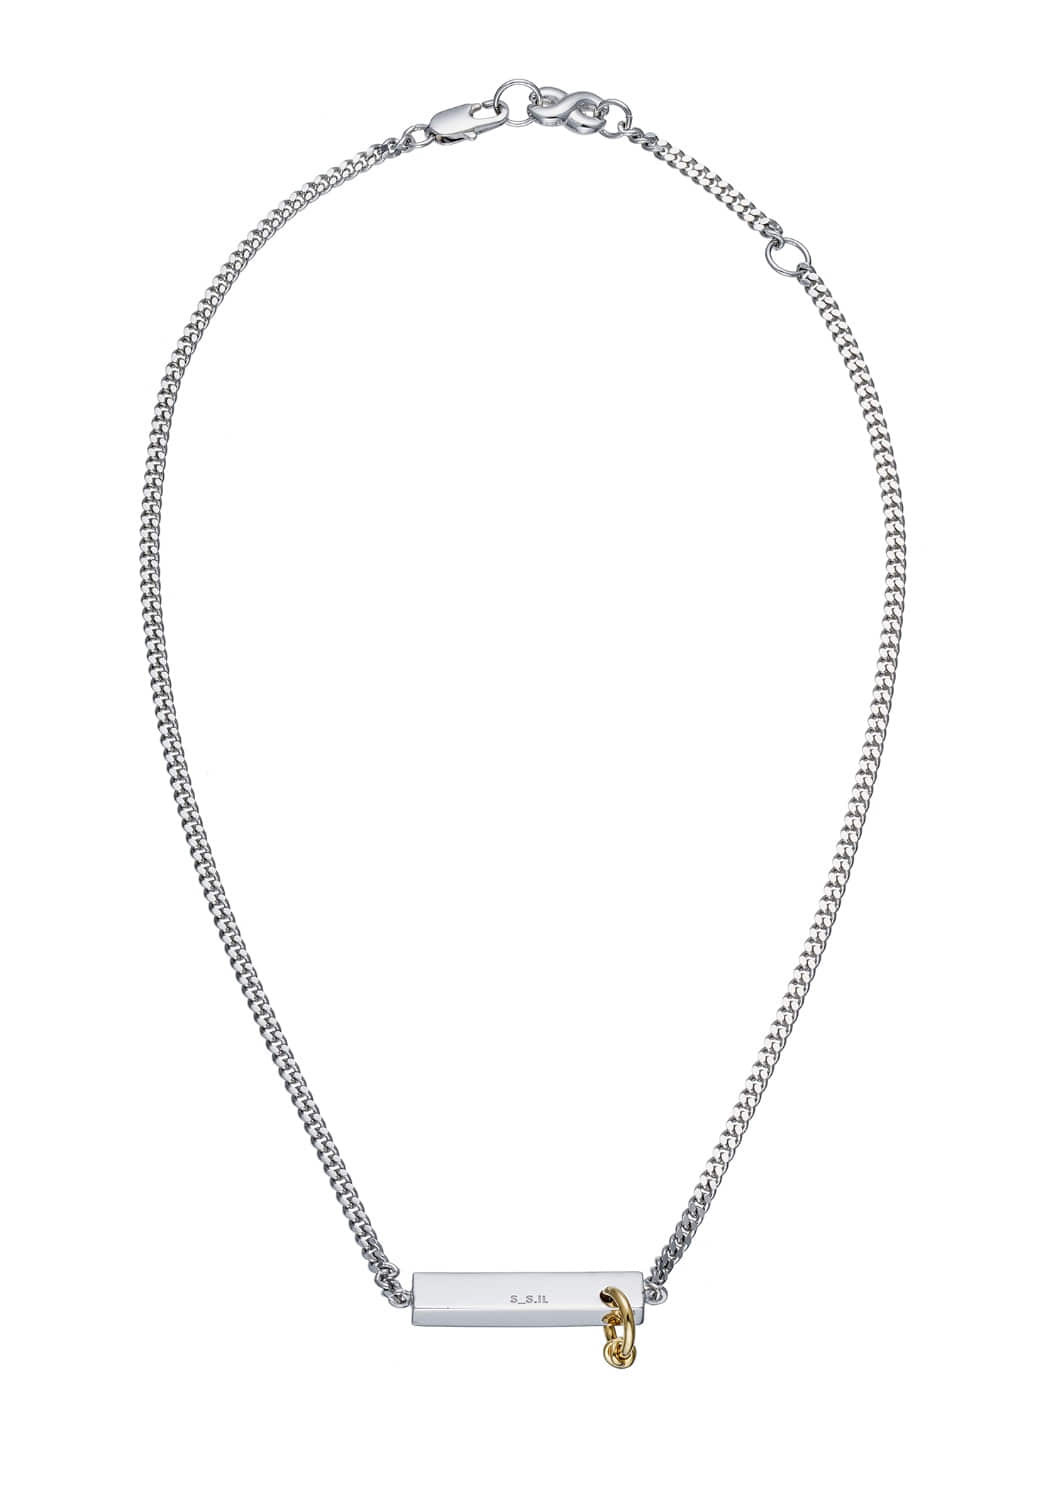 【S_S.IL】Everyday Hinged Bar Pendant Necklace／ヒンジバーペンダントネックレス [Silver/Gold]